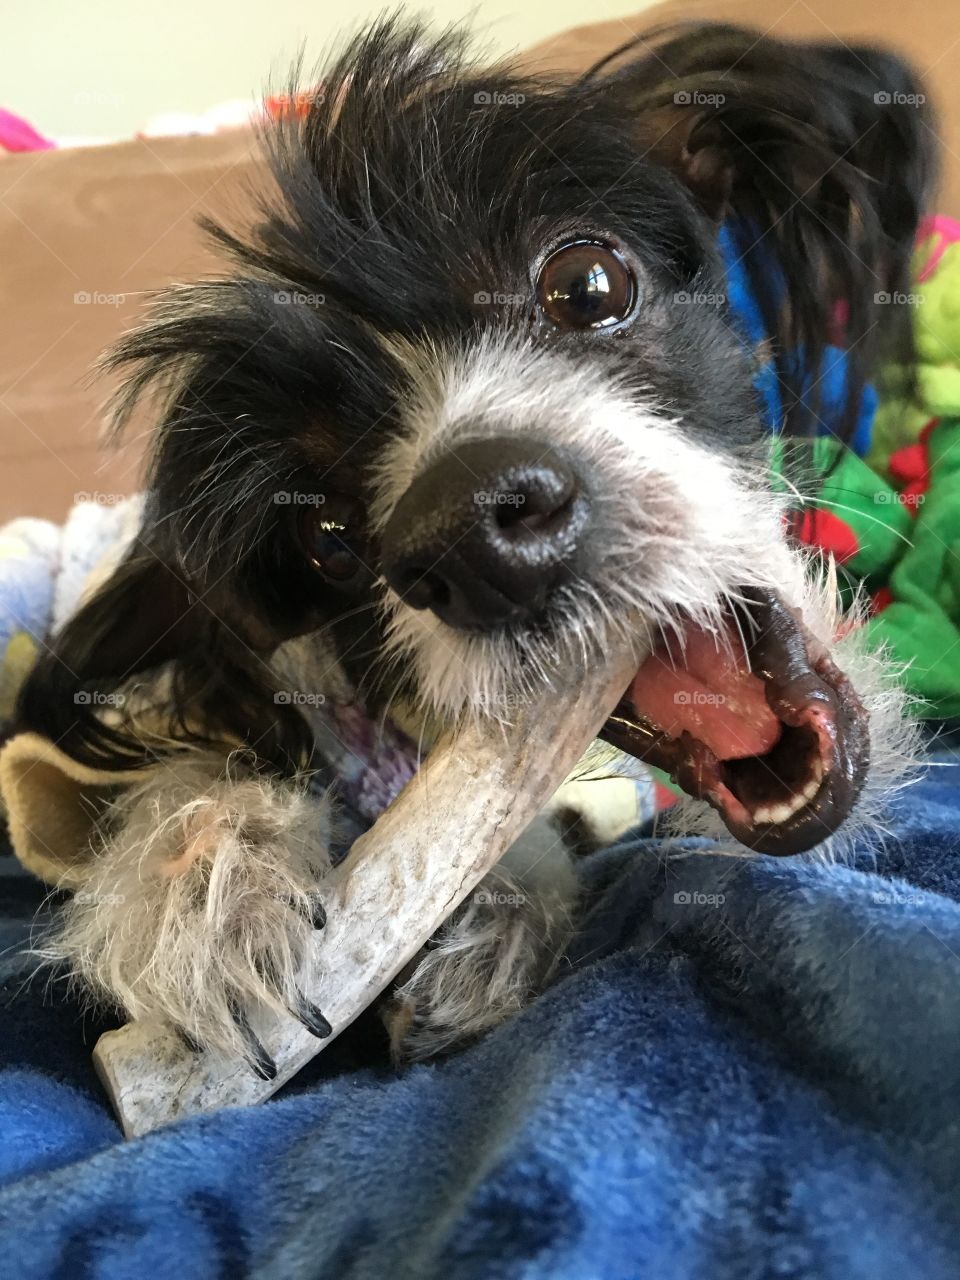 My rescue dog Gremlin. He is a Chinese Crested true hairless. He is wearing pyjamas as Canadian winters are ruthlessly cold. He is chewing on a naturally shed deer antler.